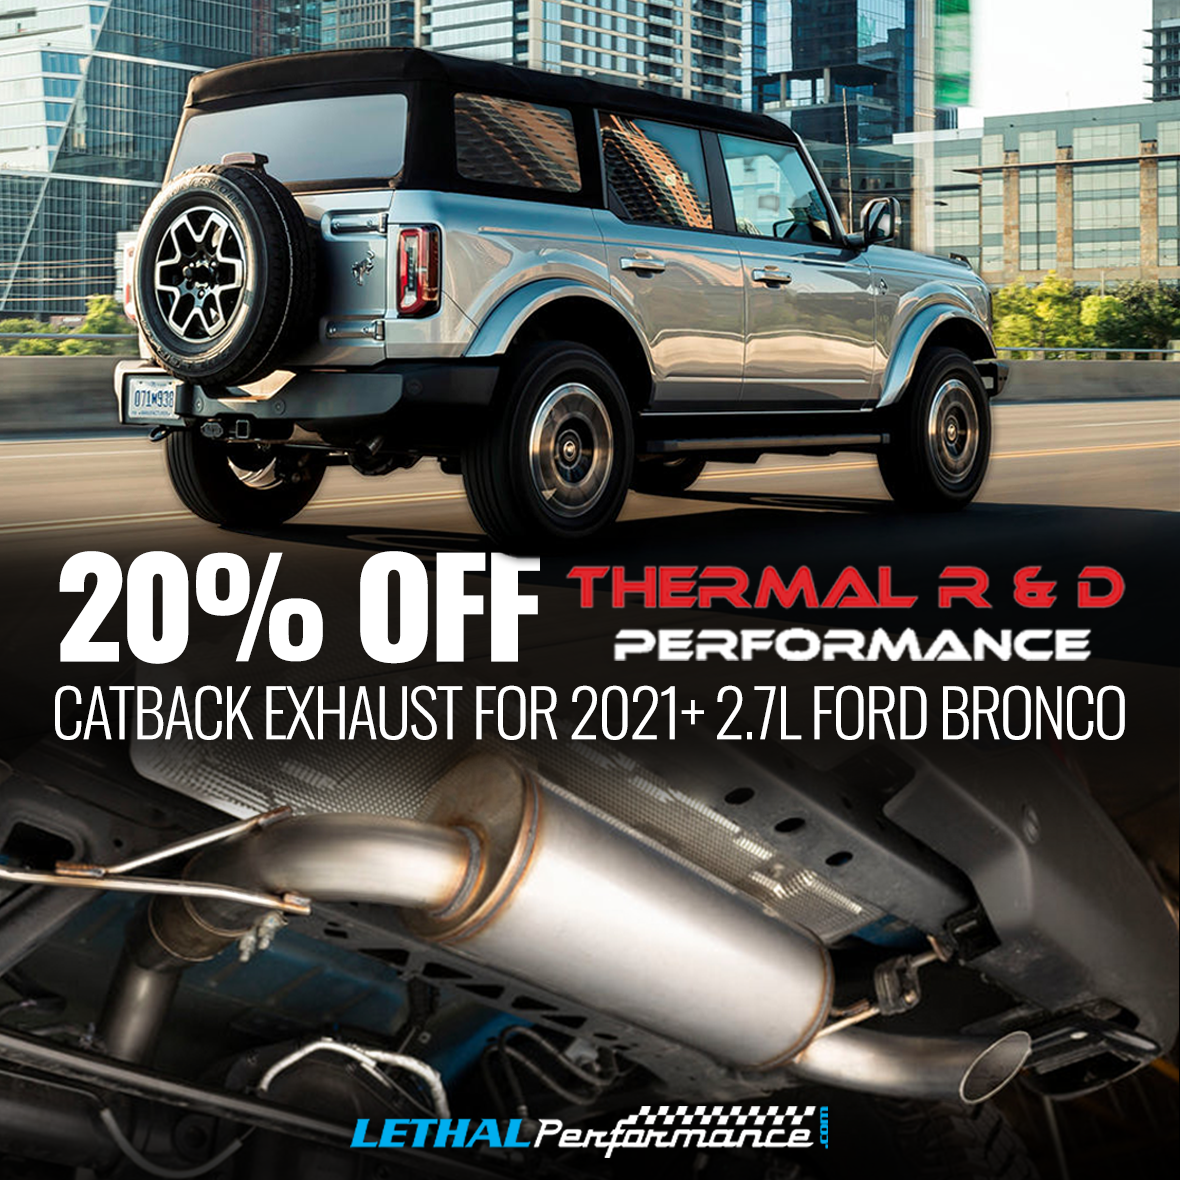 Ford Bronco Thermal R&D - 20% off at Lethal Performance thermal r&d bronco